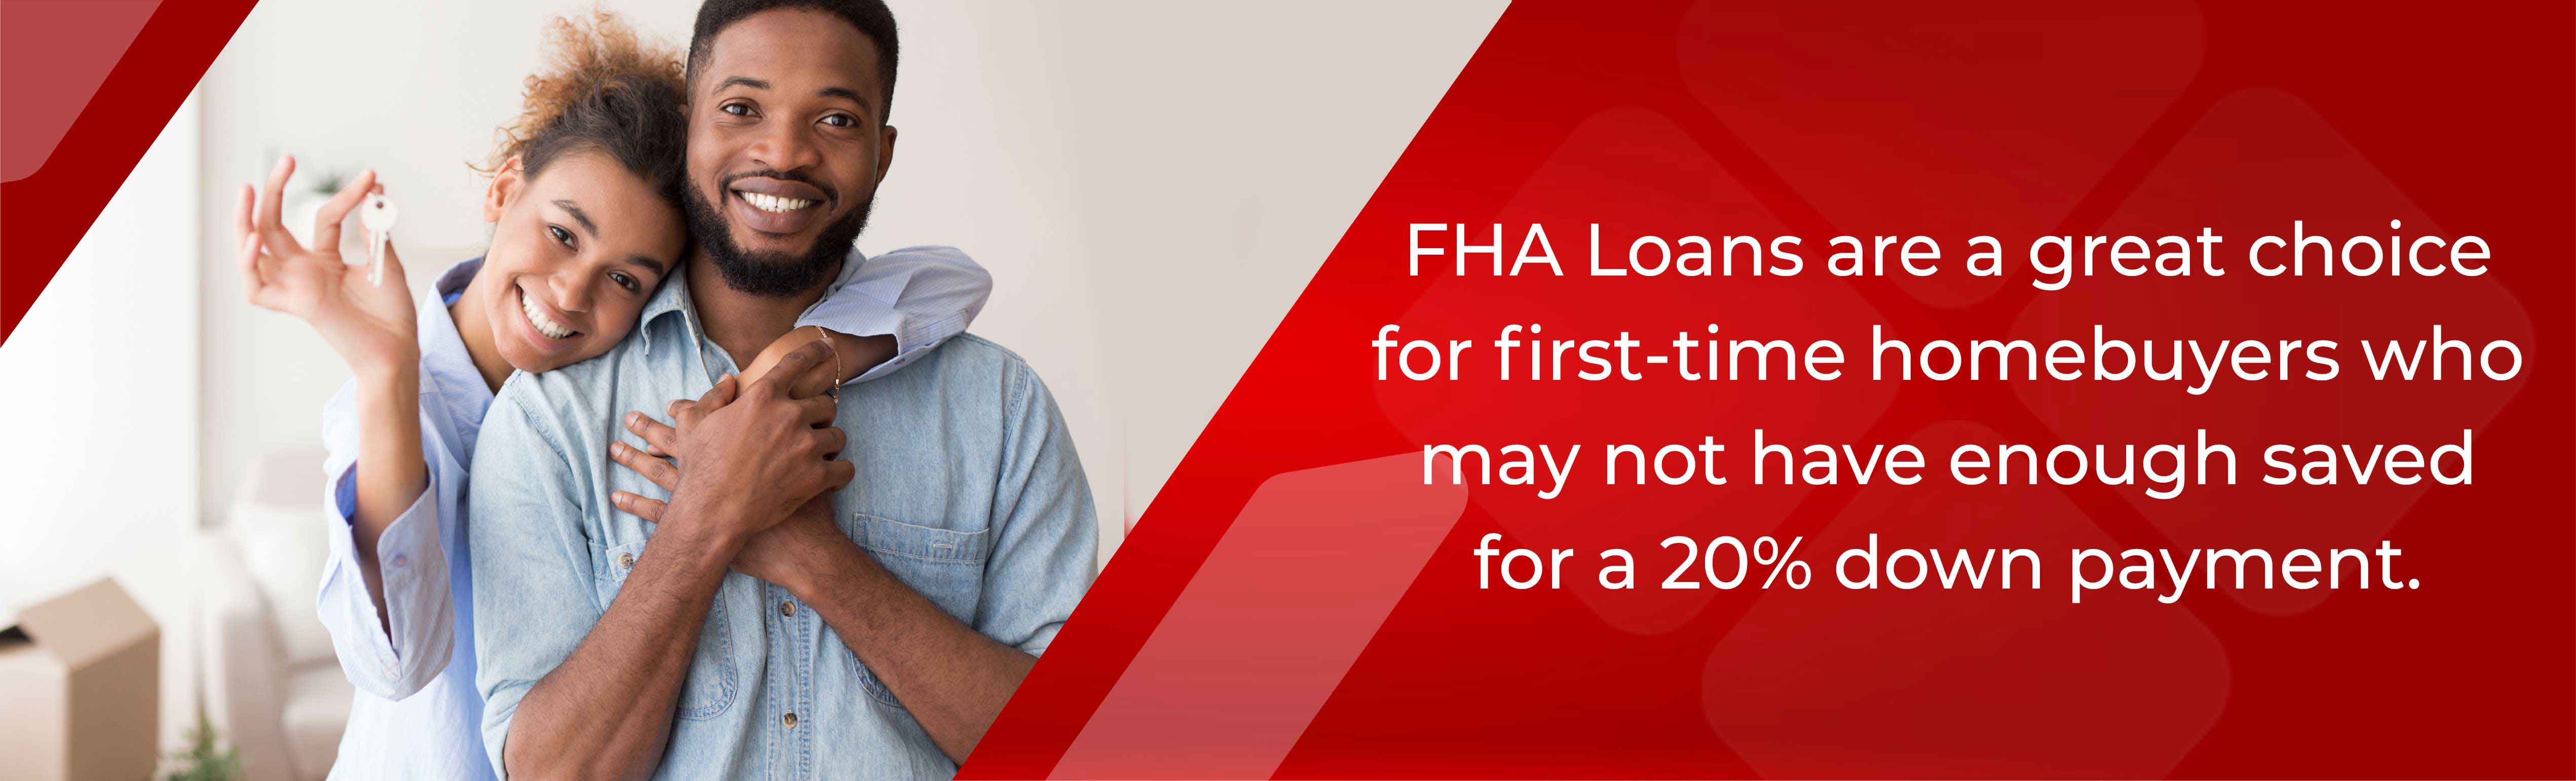 FHA Loans are a great choice for first-time homebuyers who may not have enough saved for a 20% down payment.